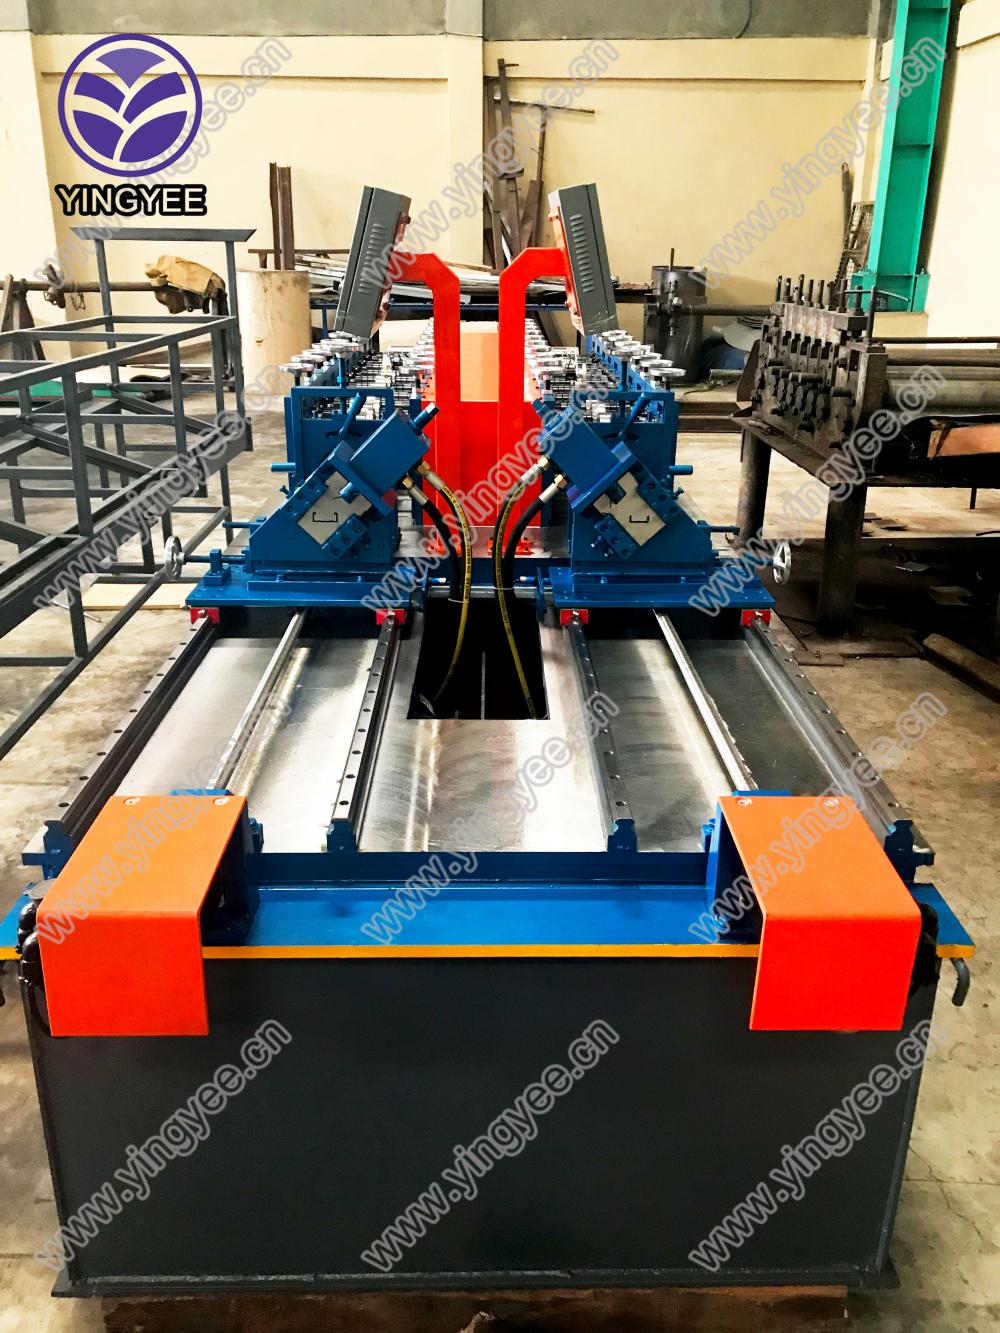 Double Out Machine From Yingyee010